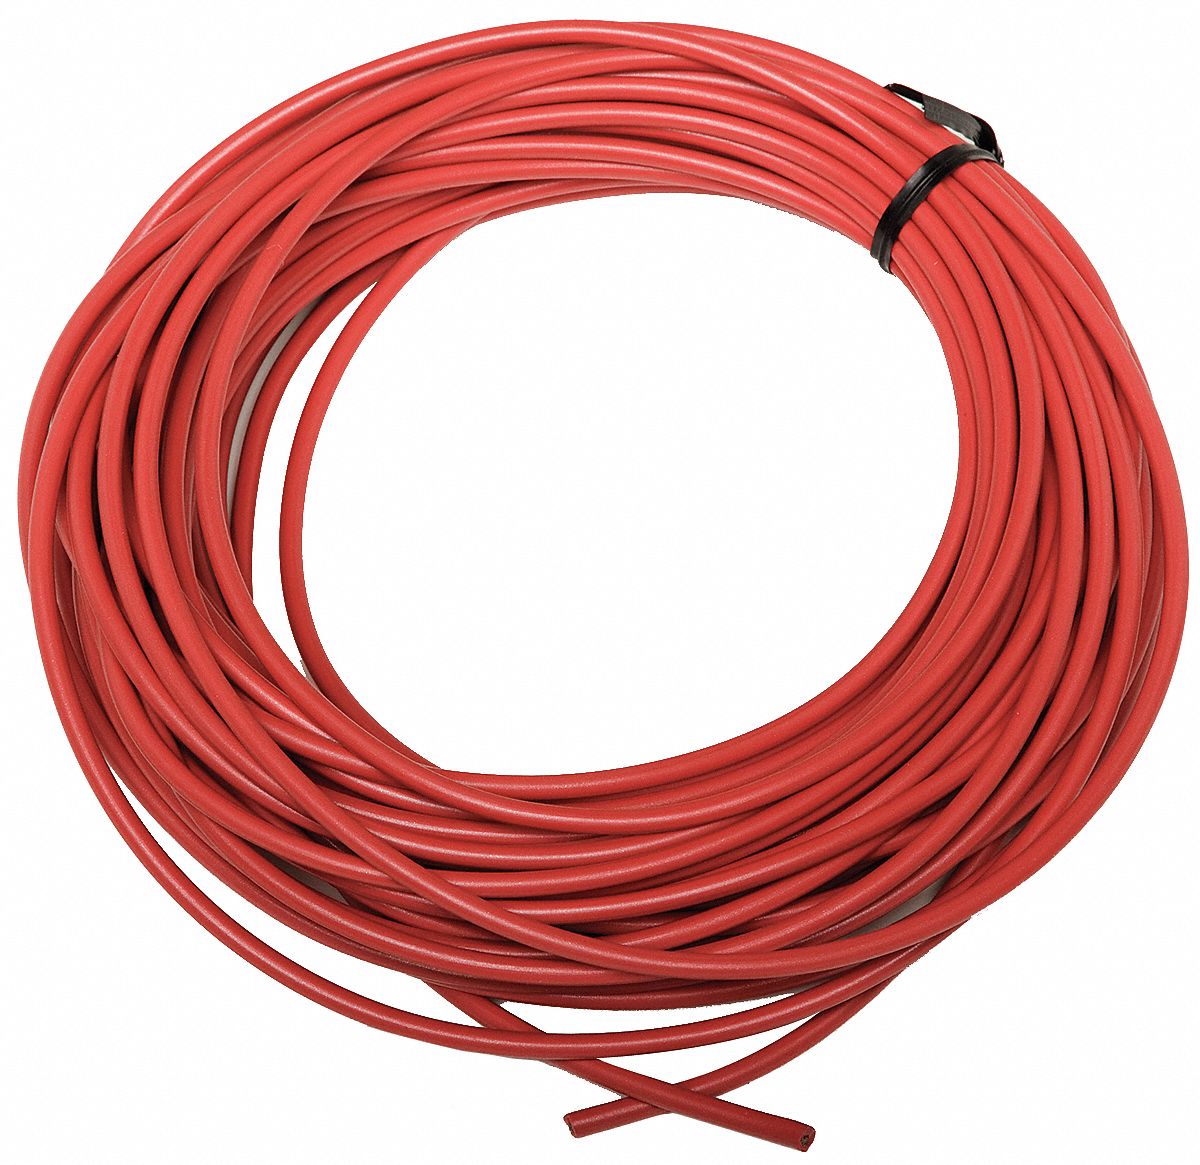 5TXC2 - Test Lead Wire 18 AWG 50 Ft Red